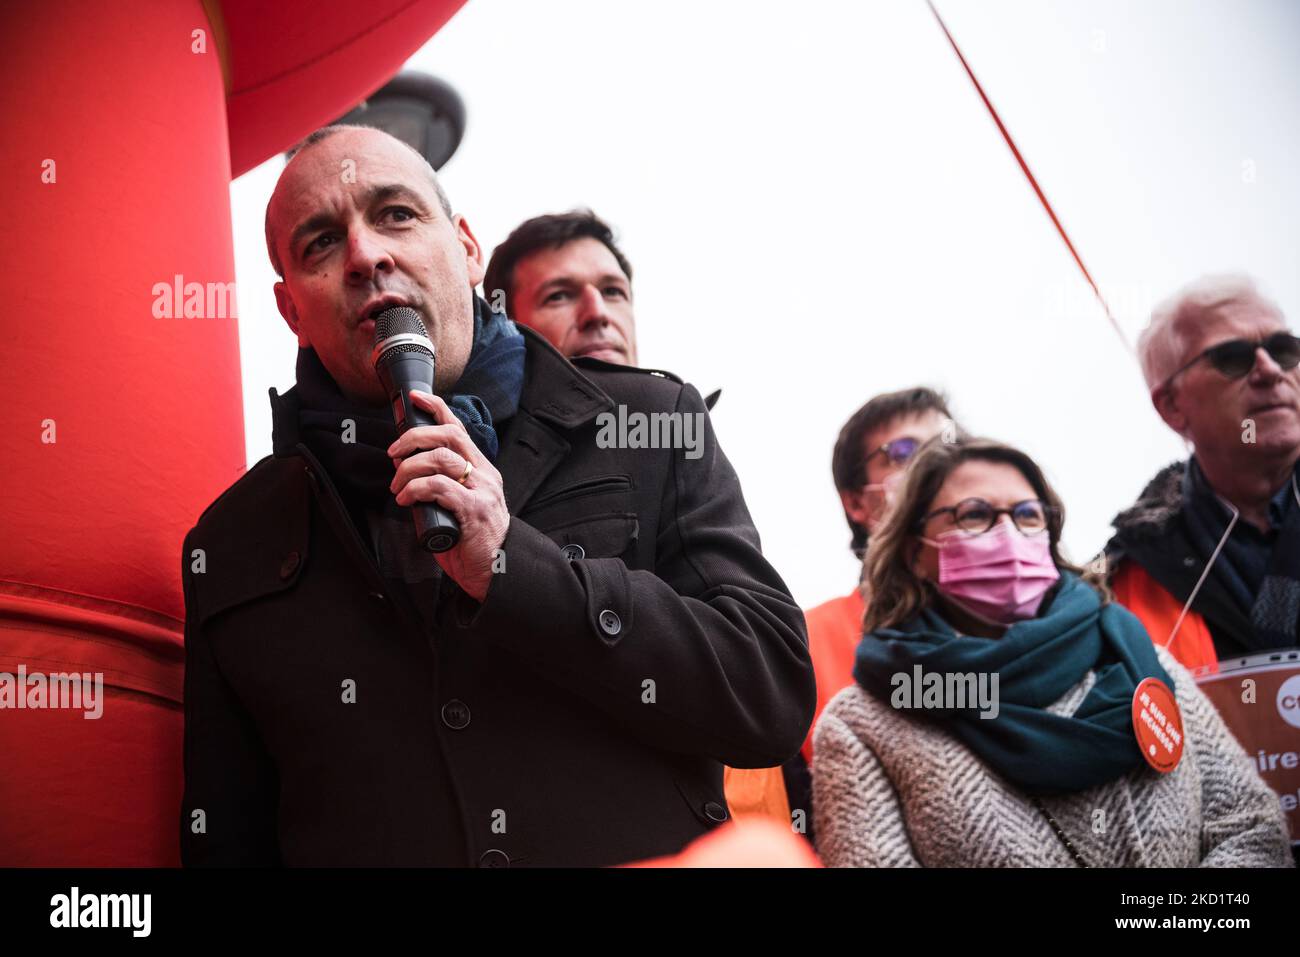 CFDT Secretary General Laurent Berger (Center) delivers a speech as several hundred CFDT (Confédération Française Des Travailleurs) union activists gathered in Paris in front of the Beaugrenelle shopping center on February 3, 2022 to participate in the March of Non-Essential Workers organized by the union to demand better wages and working conditions for those on the front lines during the COVID pandemic. (Photo by Samuel Boivin/NurPhoto) Stock Photo